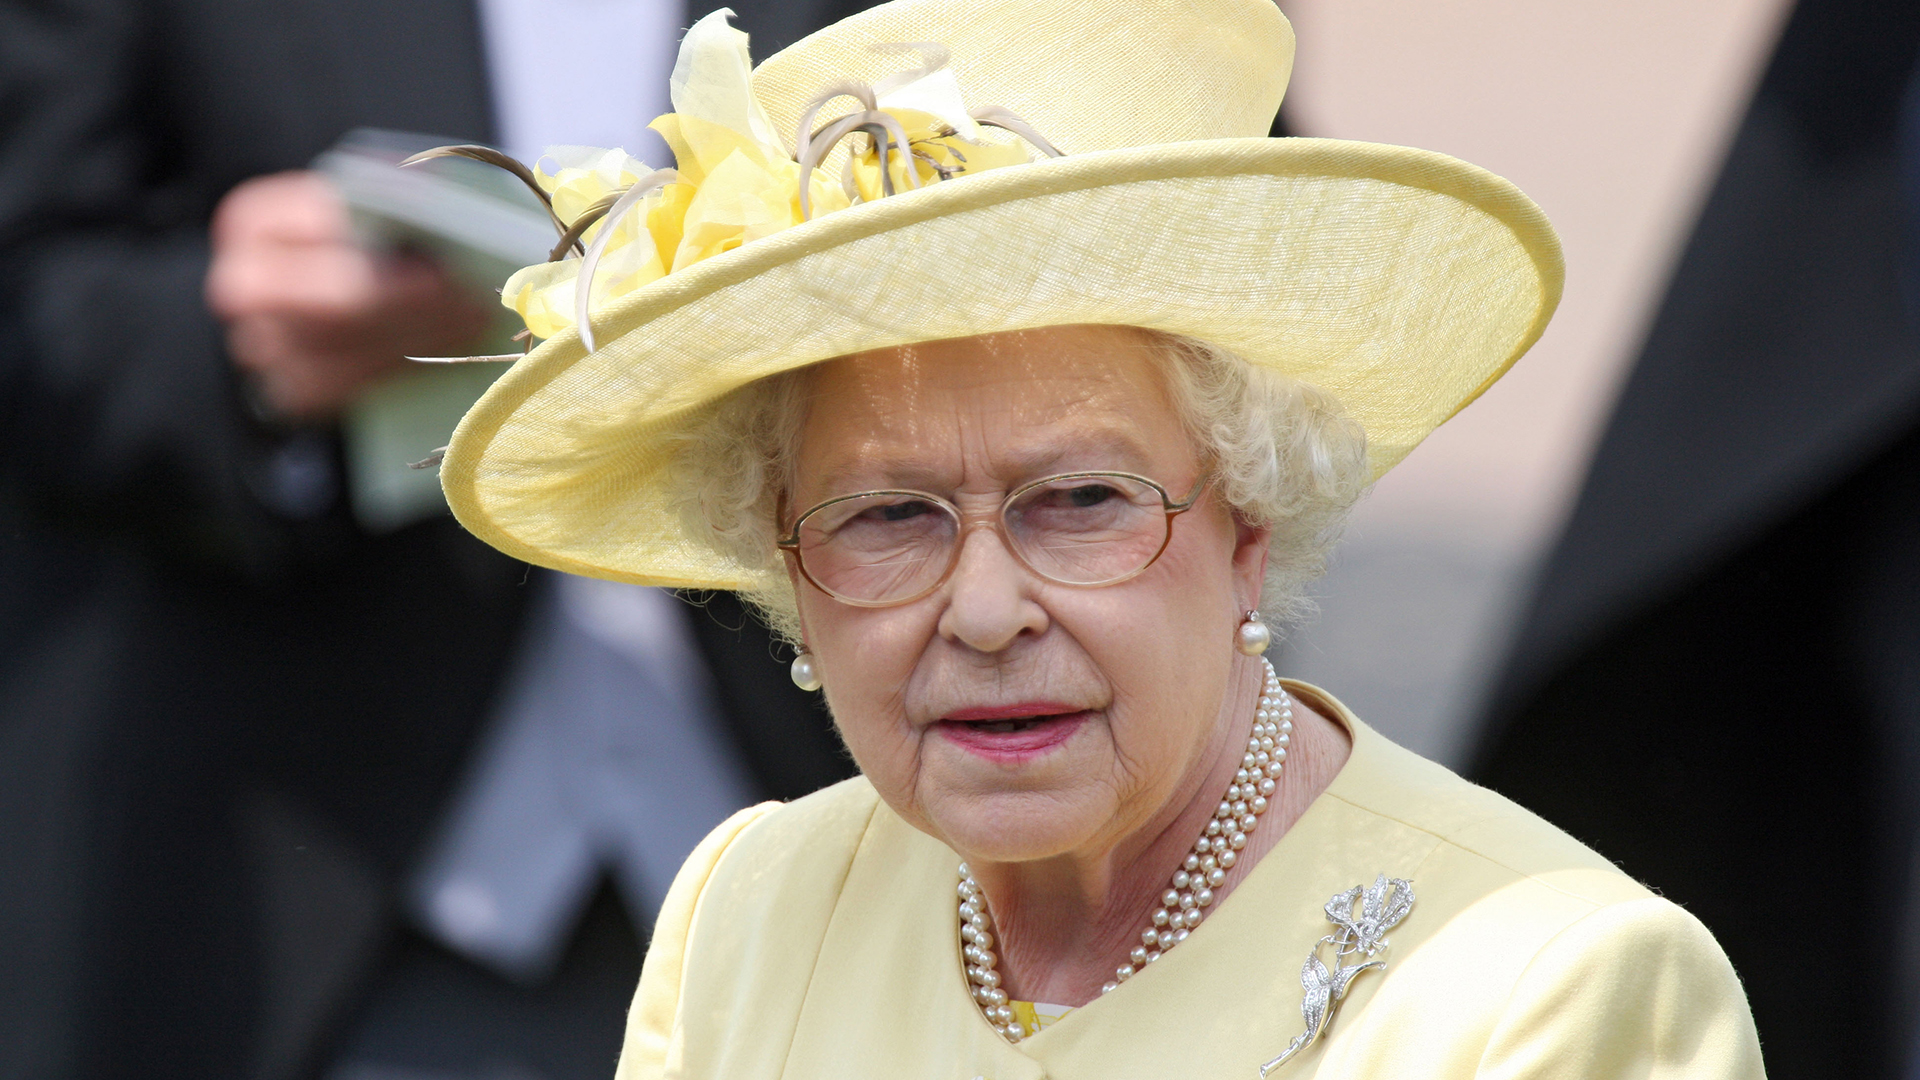 7 Facts About Elizabeth II That She Wouldn’t Want You To Know